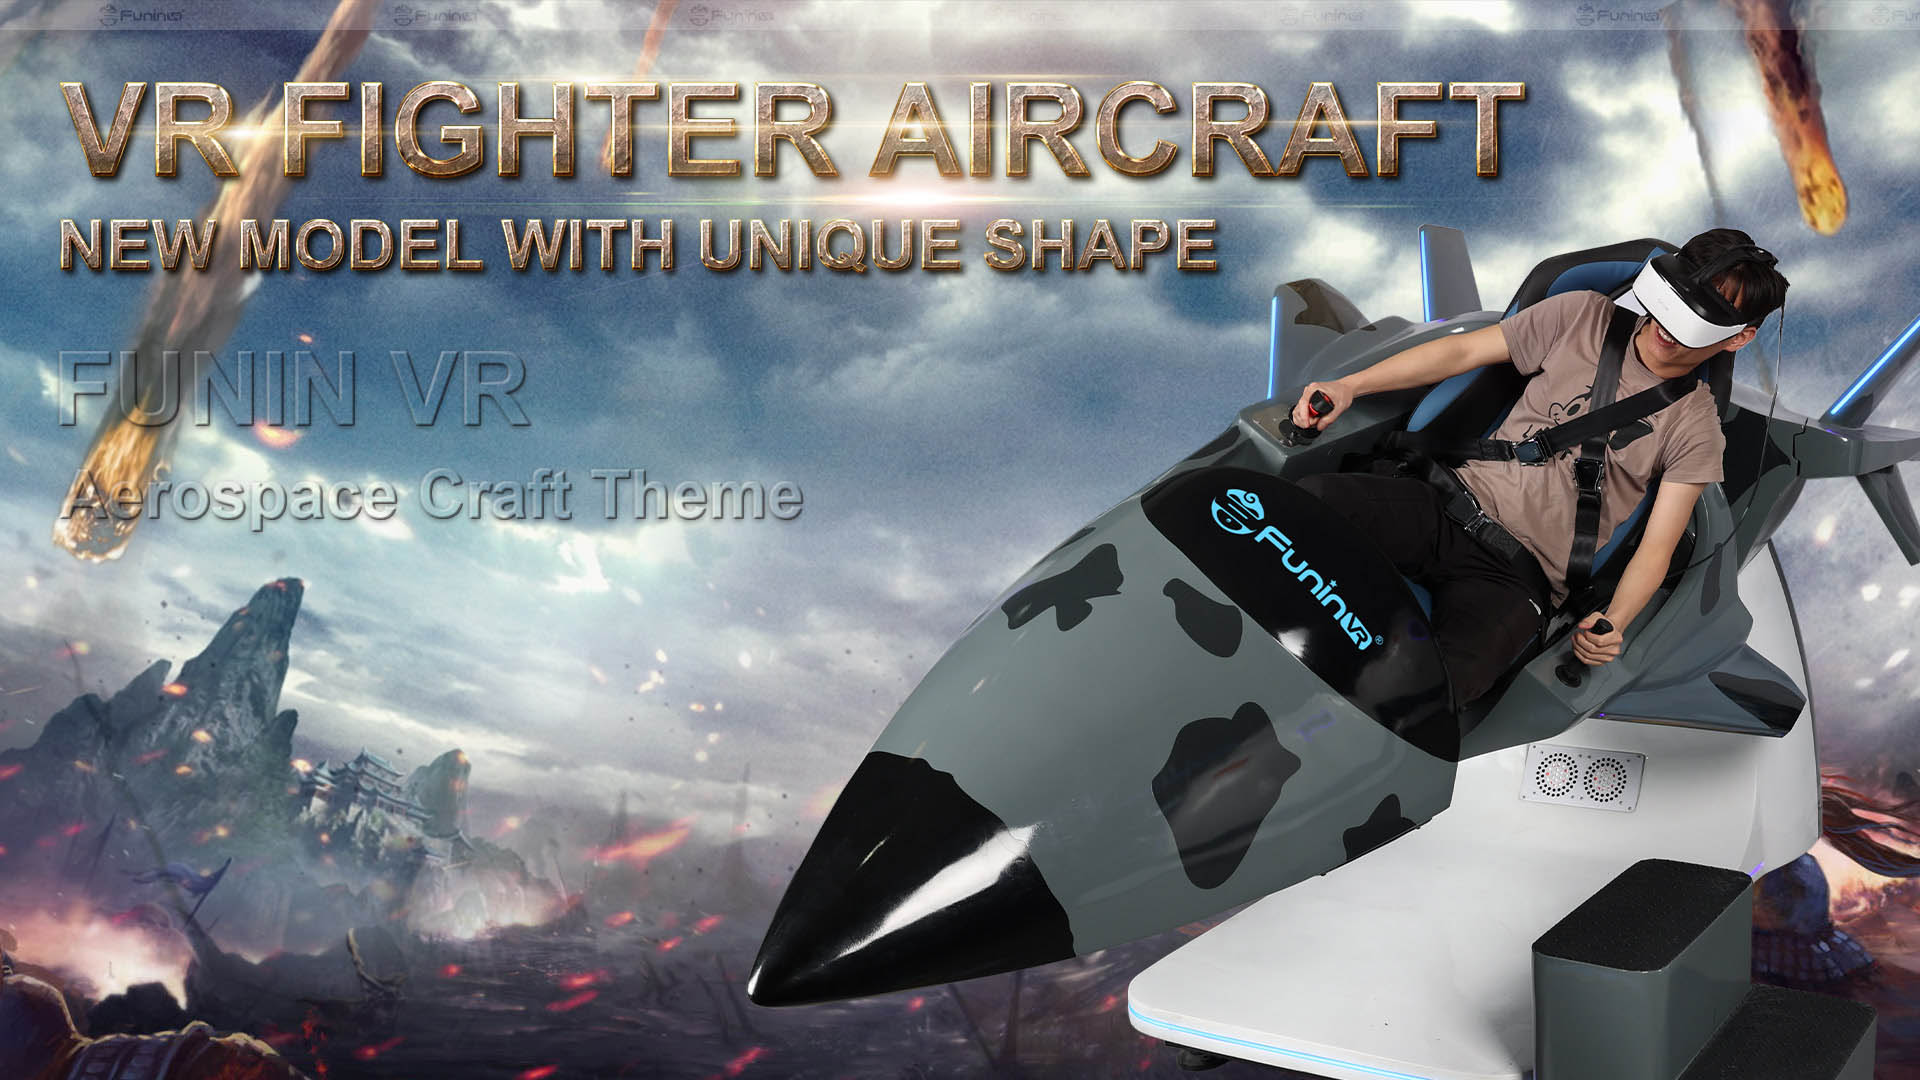 VR Arcade Game Machine Fighter Aircraft Virtual Reality Equipment - Shooting Theme - 1